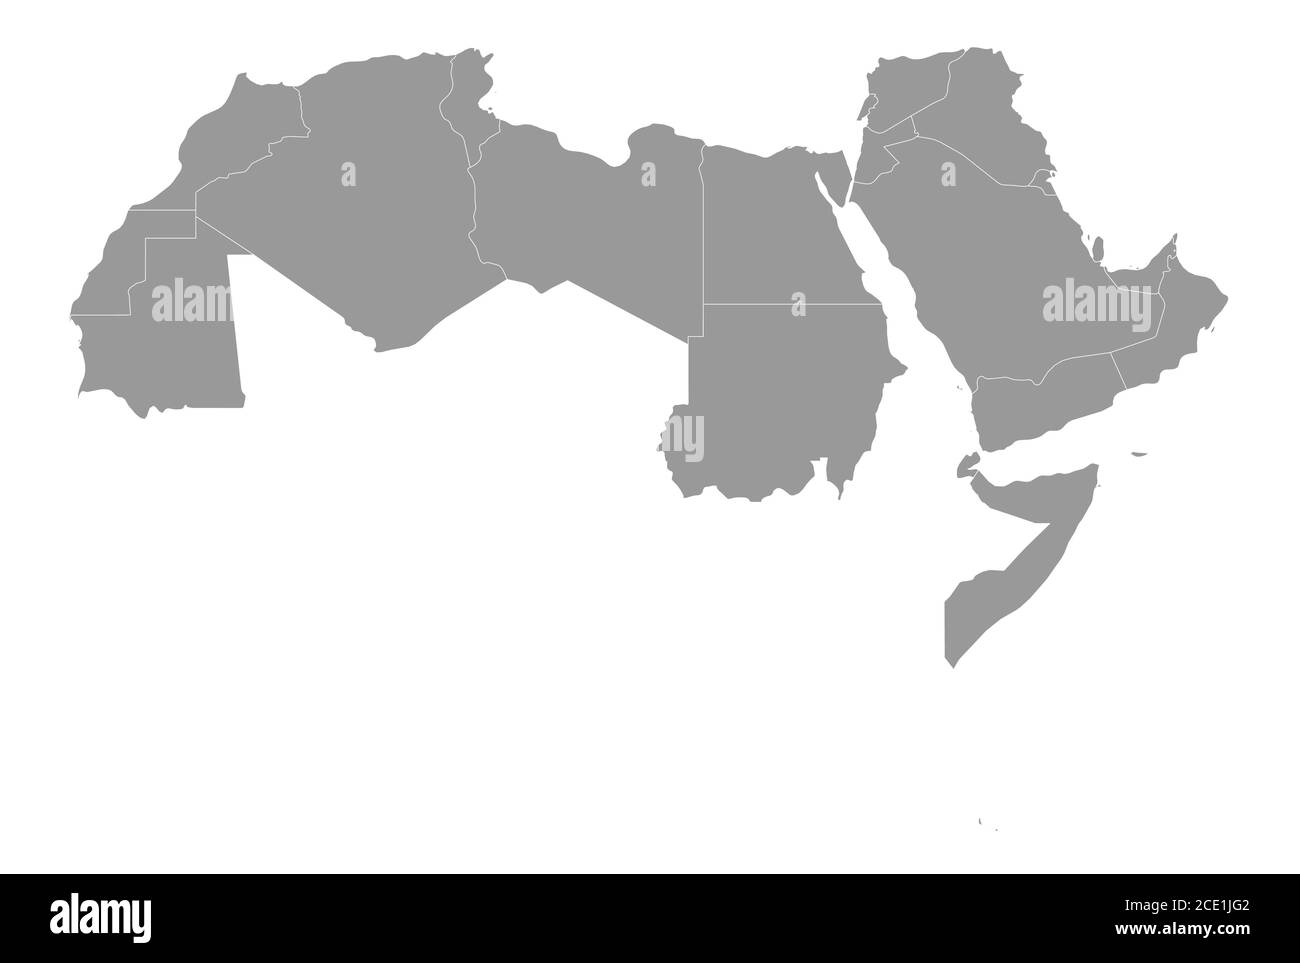 Arab World states political map with higlighted 22 arabic-speaking countries of the Arab League. Northern Africa and Middle East region. Vector illustration. Stock Vector